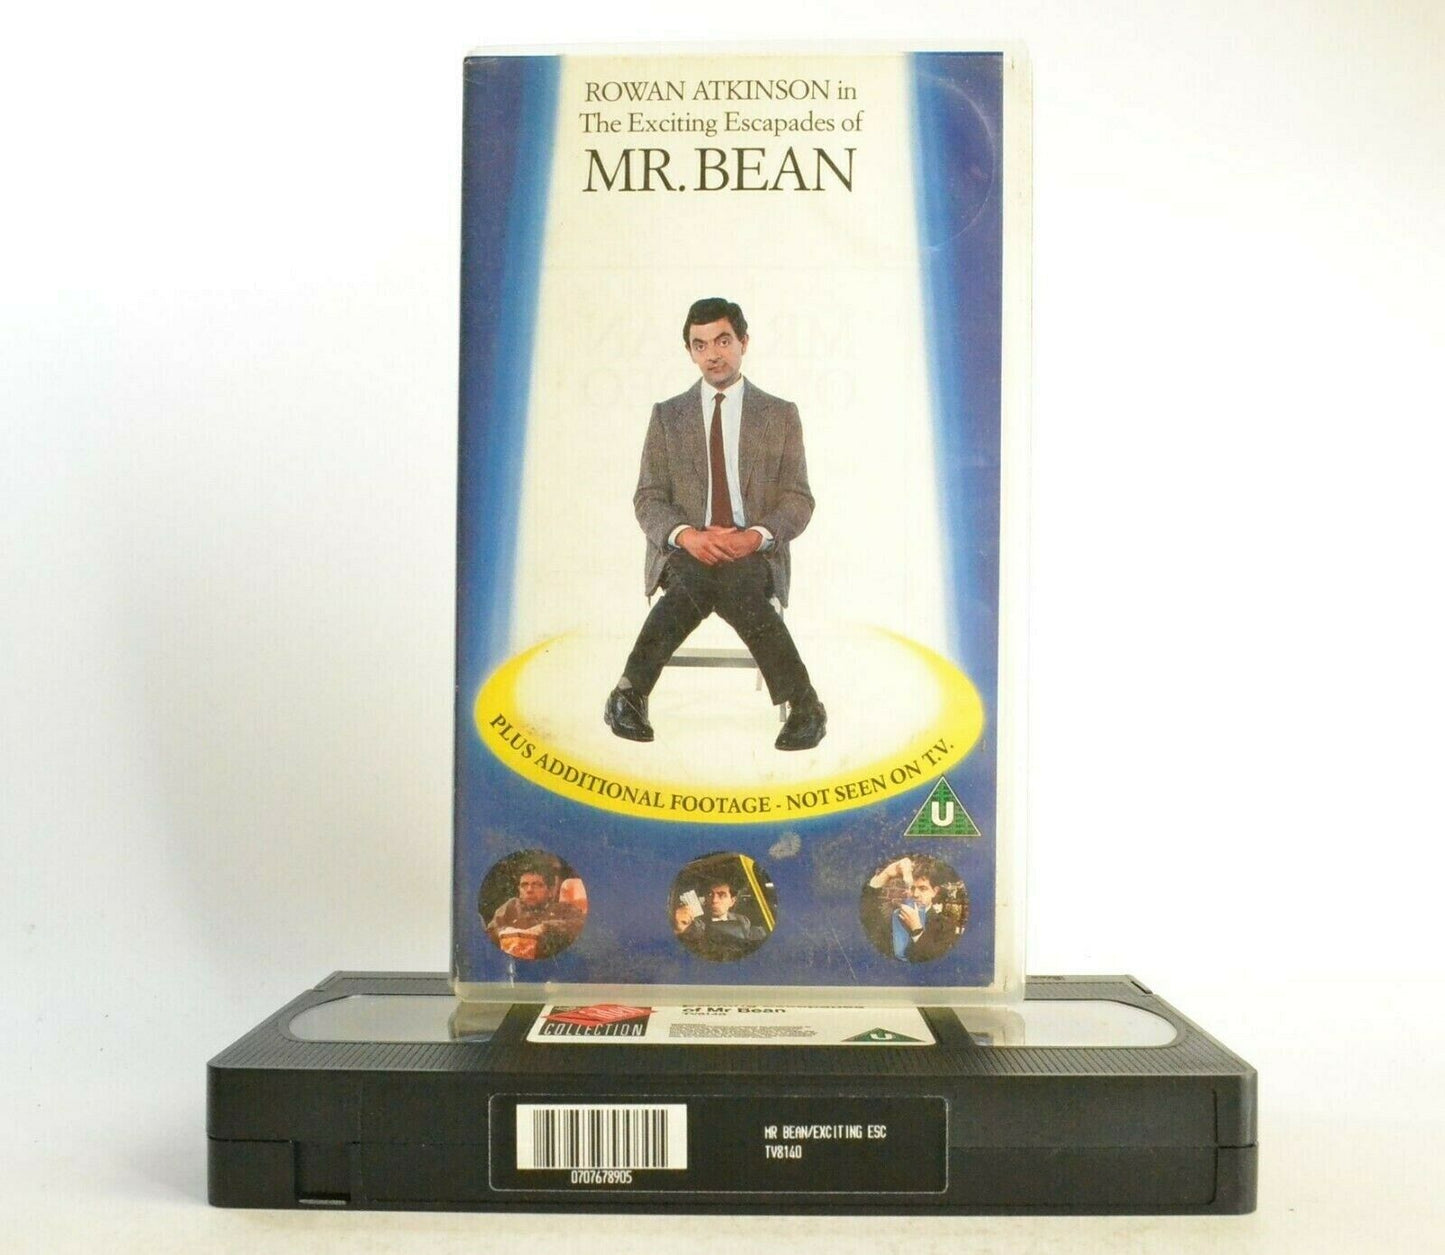 The Exciting Escapades Of Mr.Bean: Comedy Classic - R.Atkinson - Kids - Pal VHS-